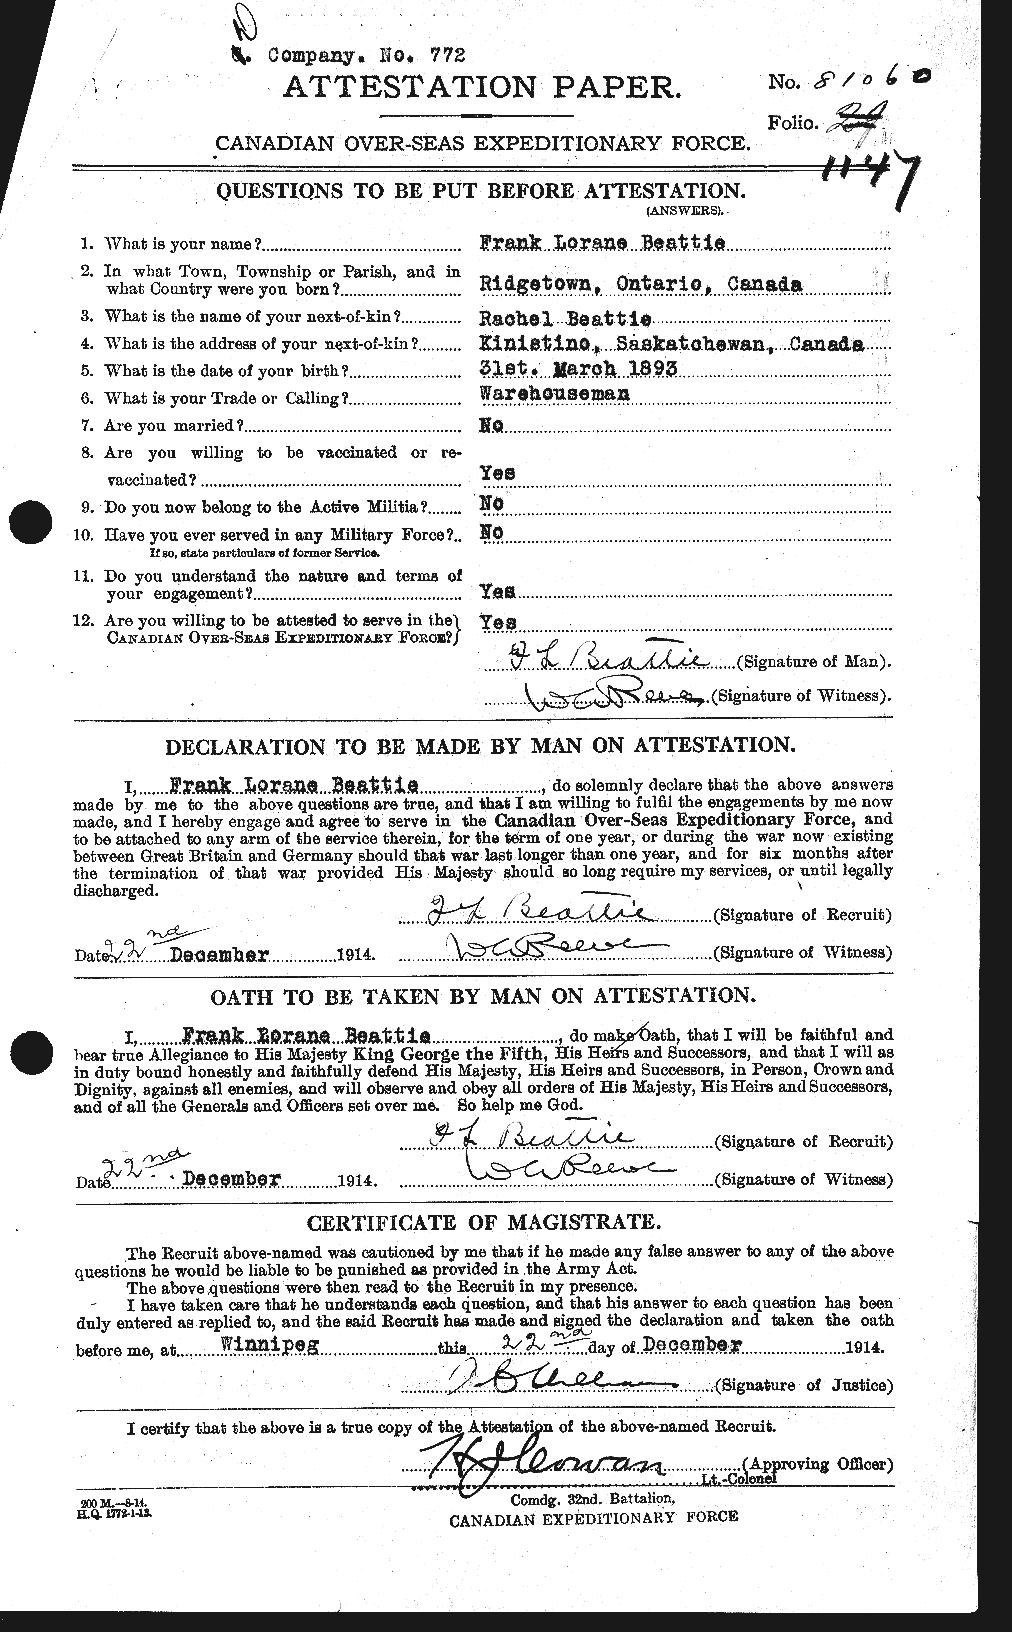 Personnel Records of the First World War - CEF 230683a